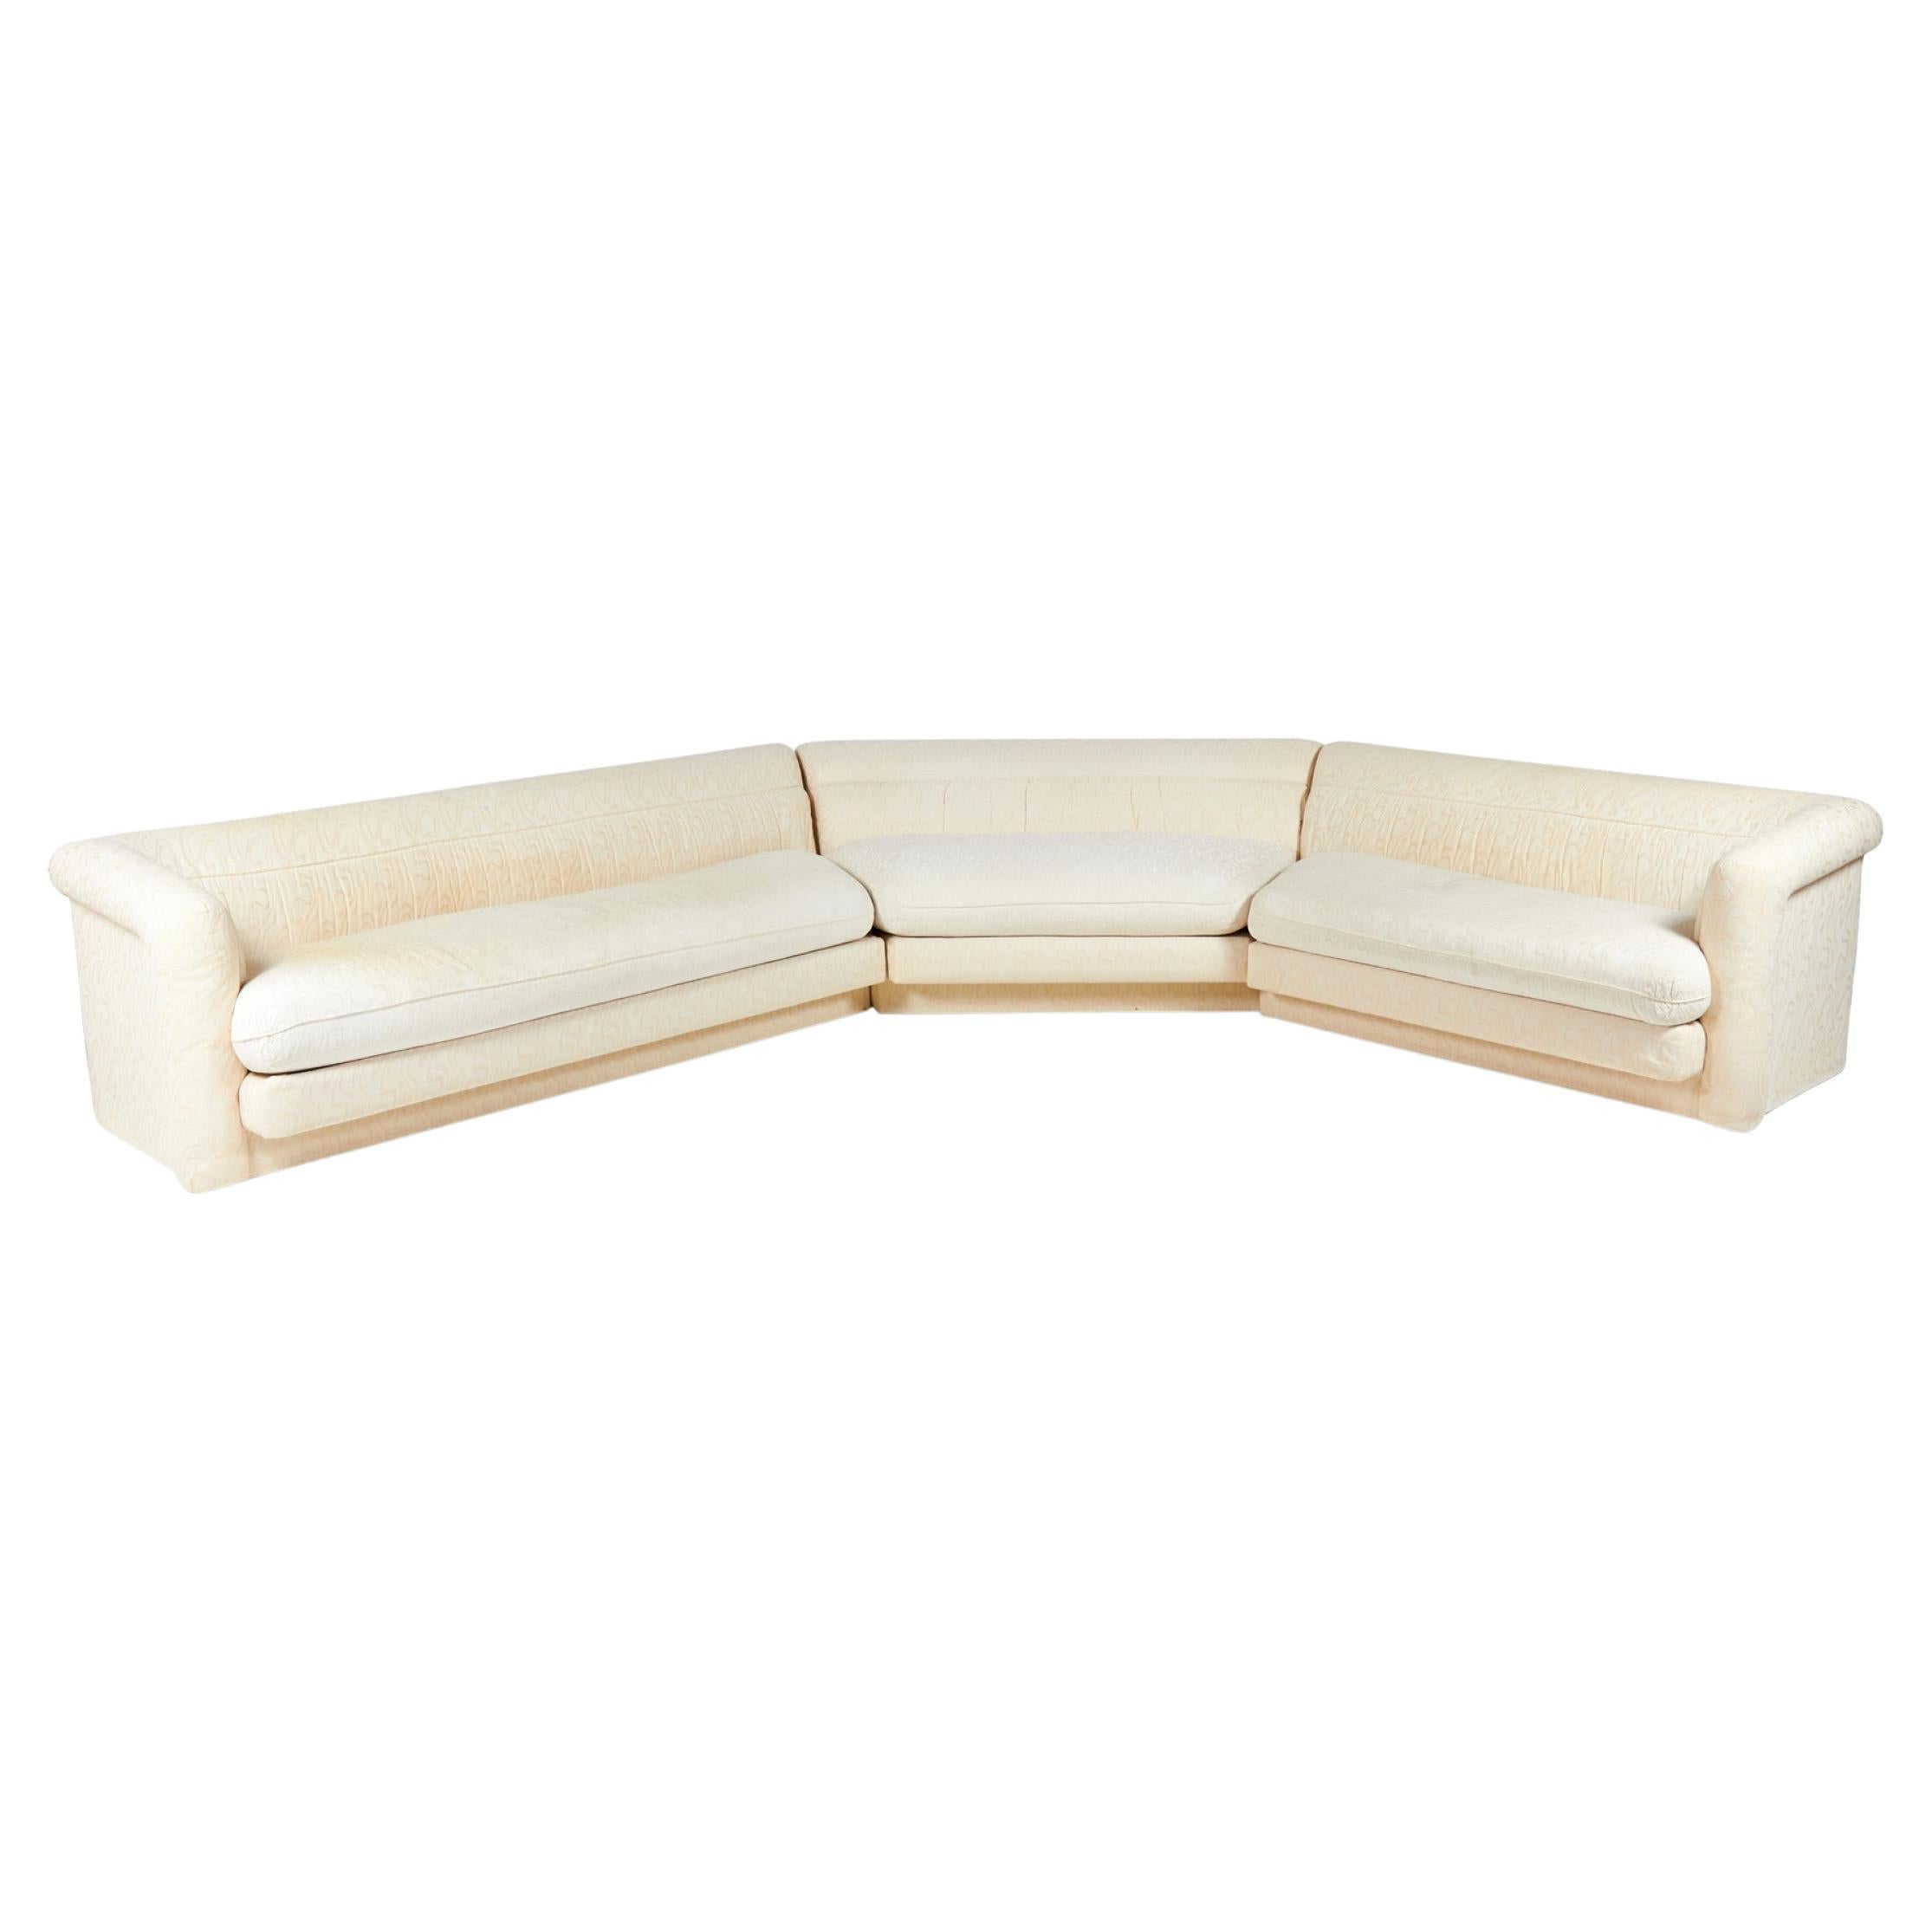 American Vintage White and Cream Swirl Upholstered 3-Piece Sectional Sofa For Sale